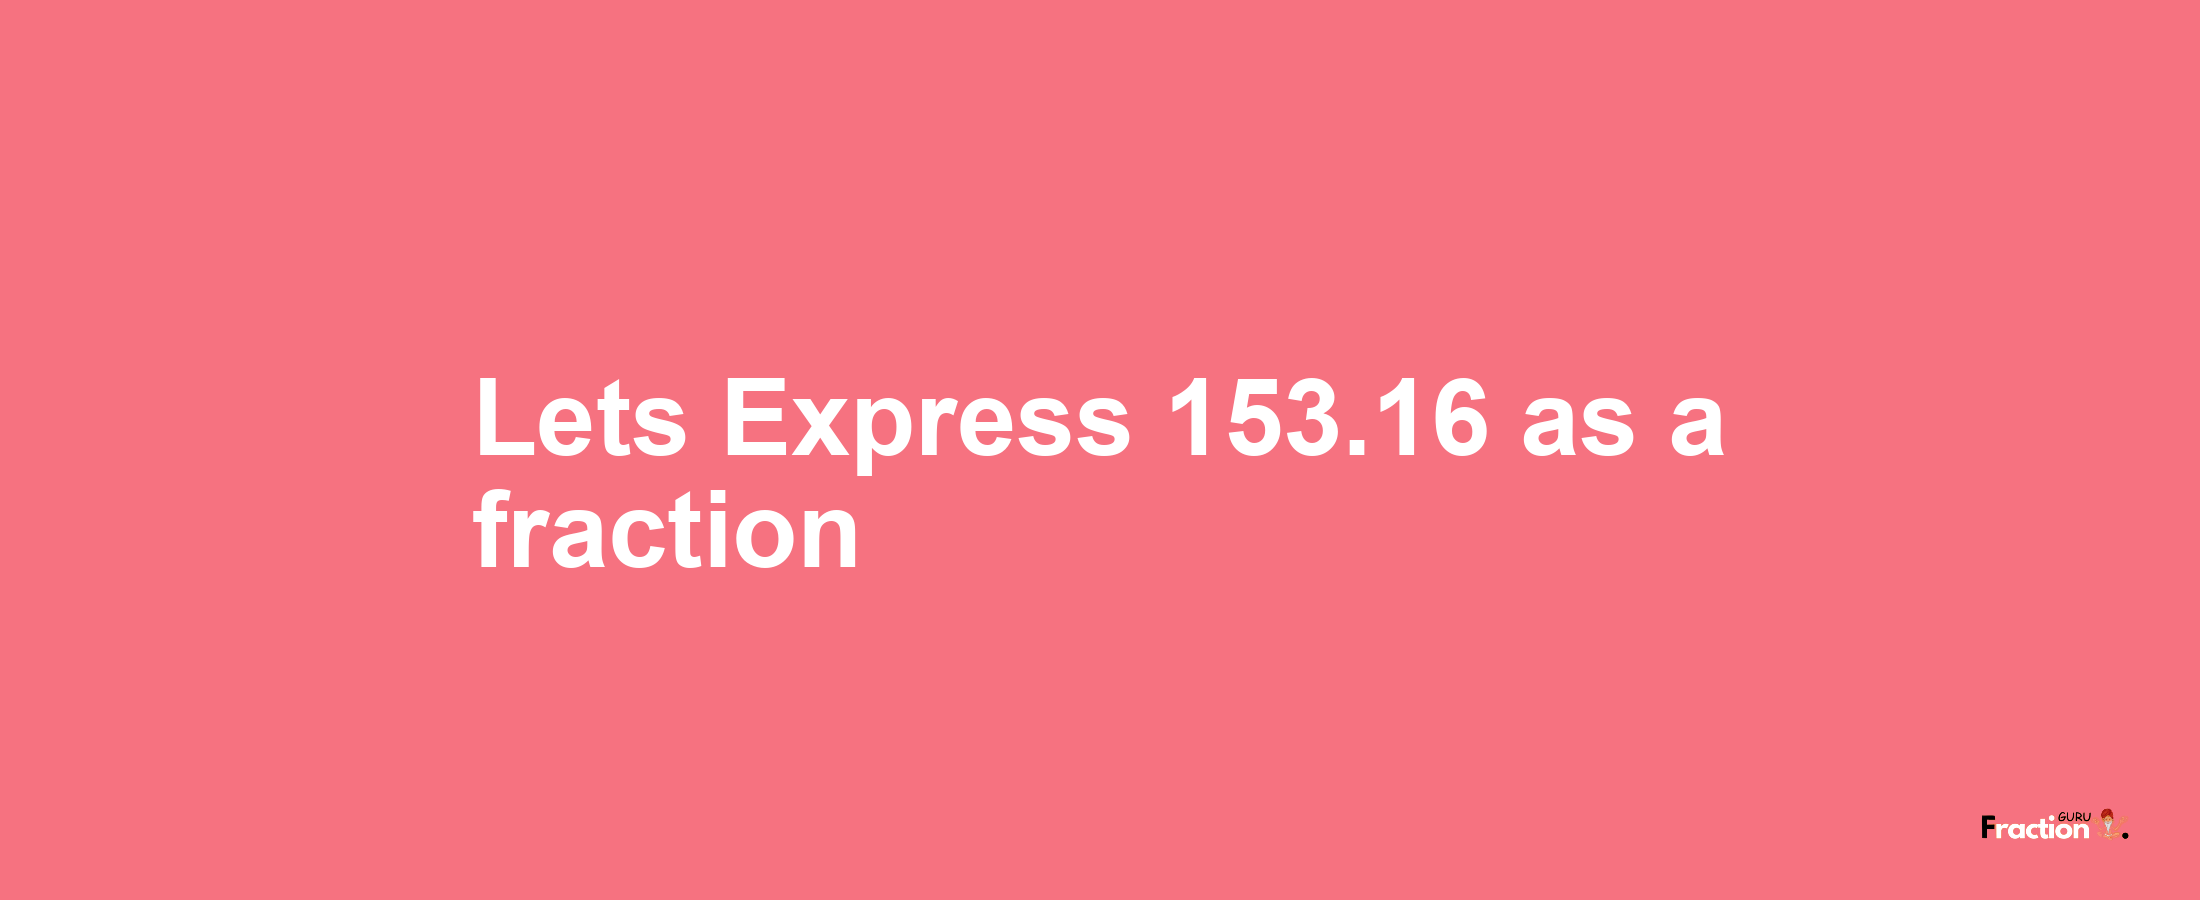 Lets Express 153.16 as afraction